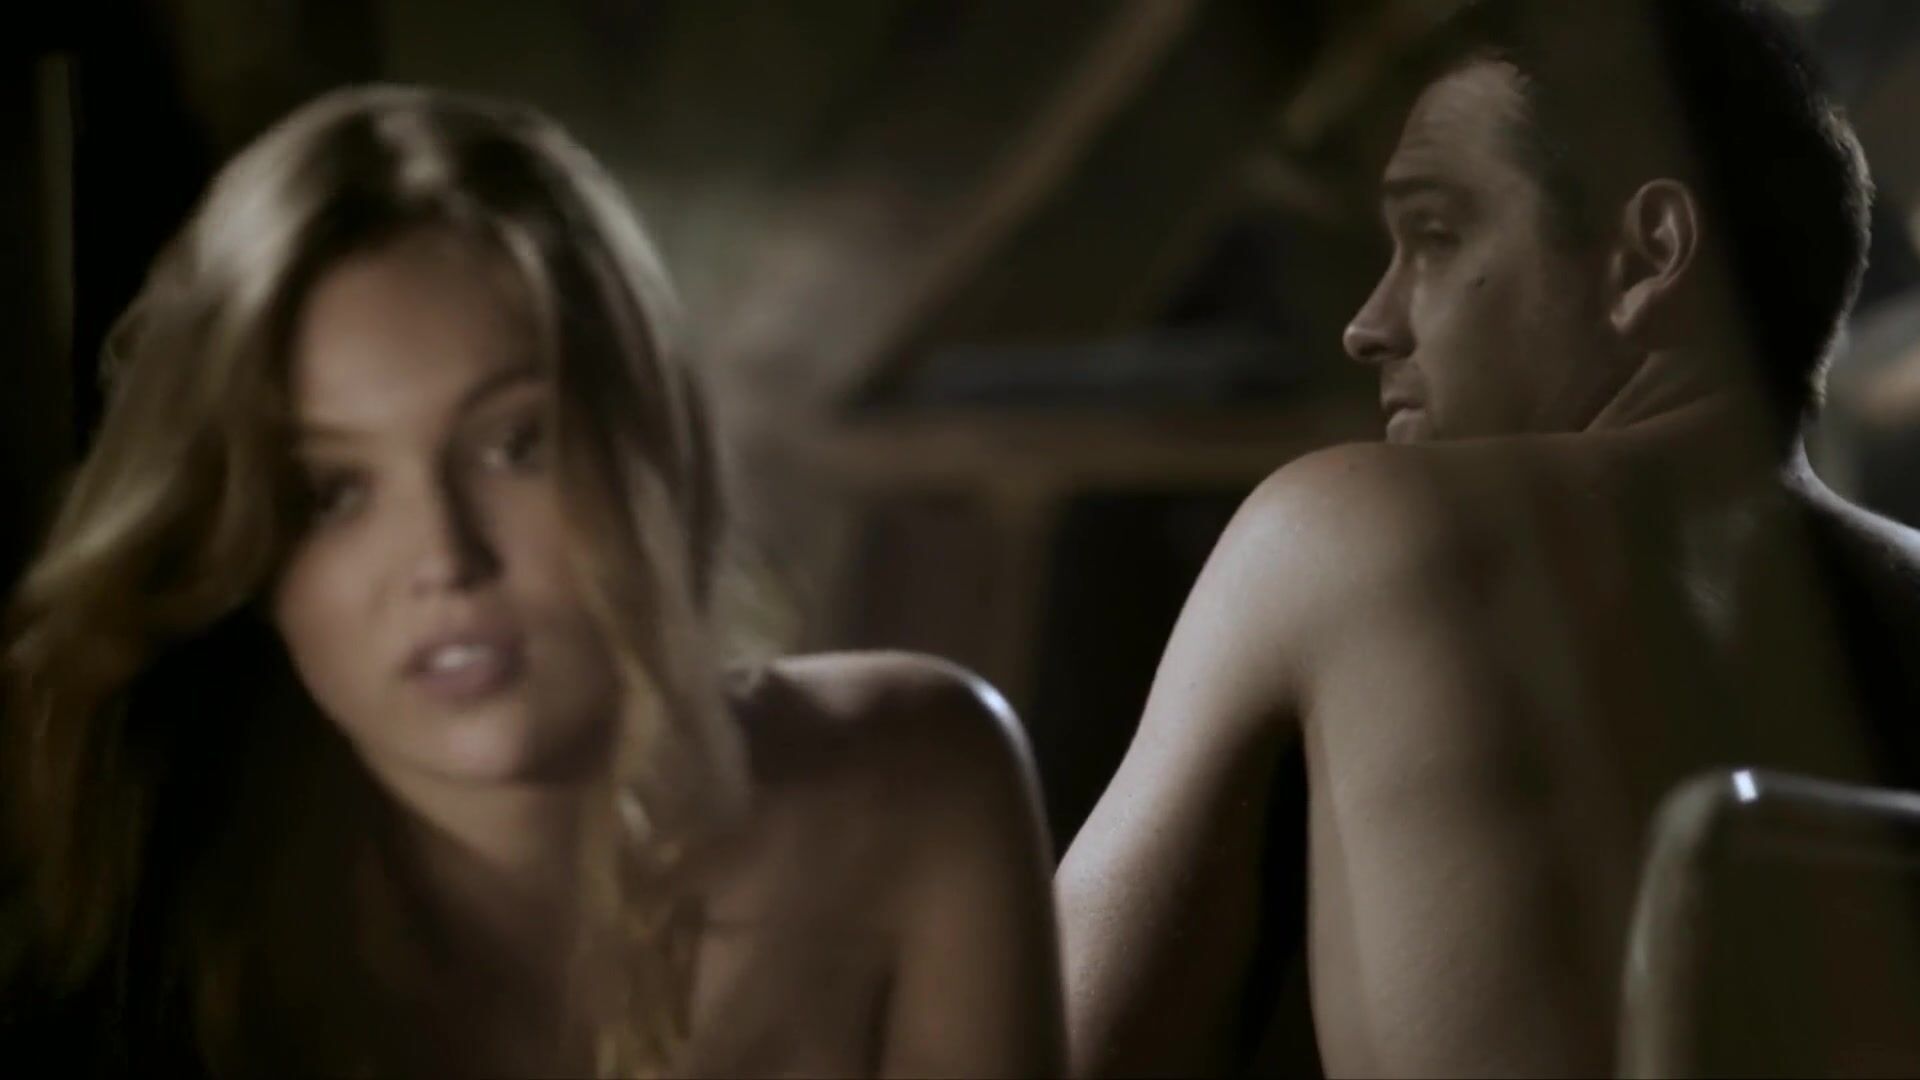 This Tempting minx Lili Simmons with tiny tits nailed in different poses in TV series Banshee 18QT - 1